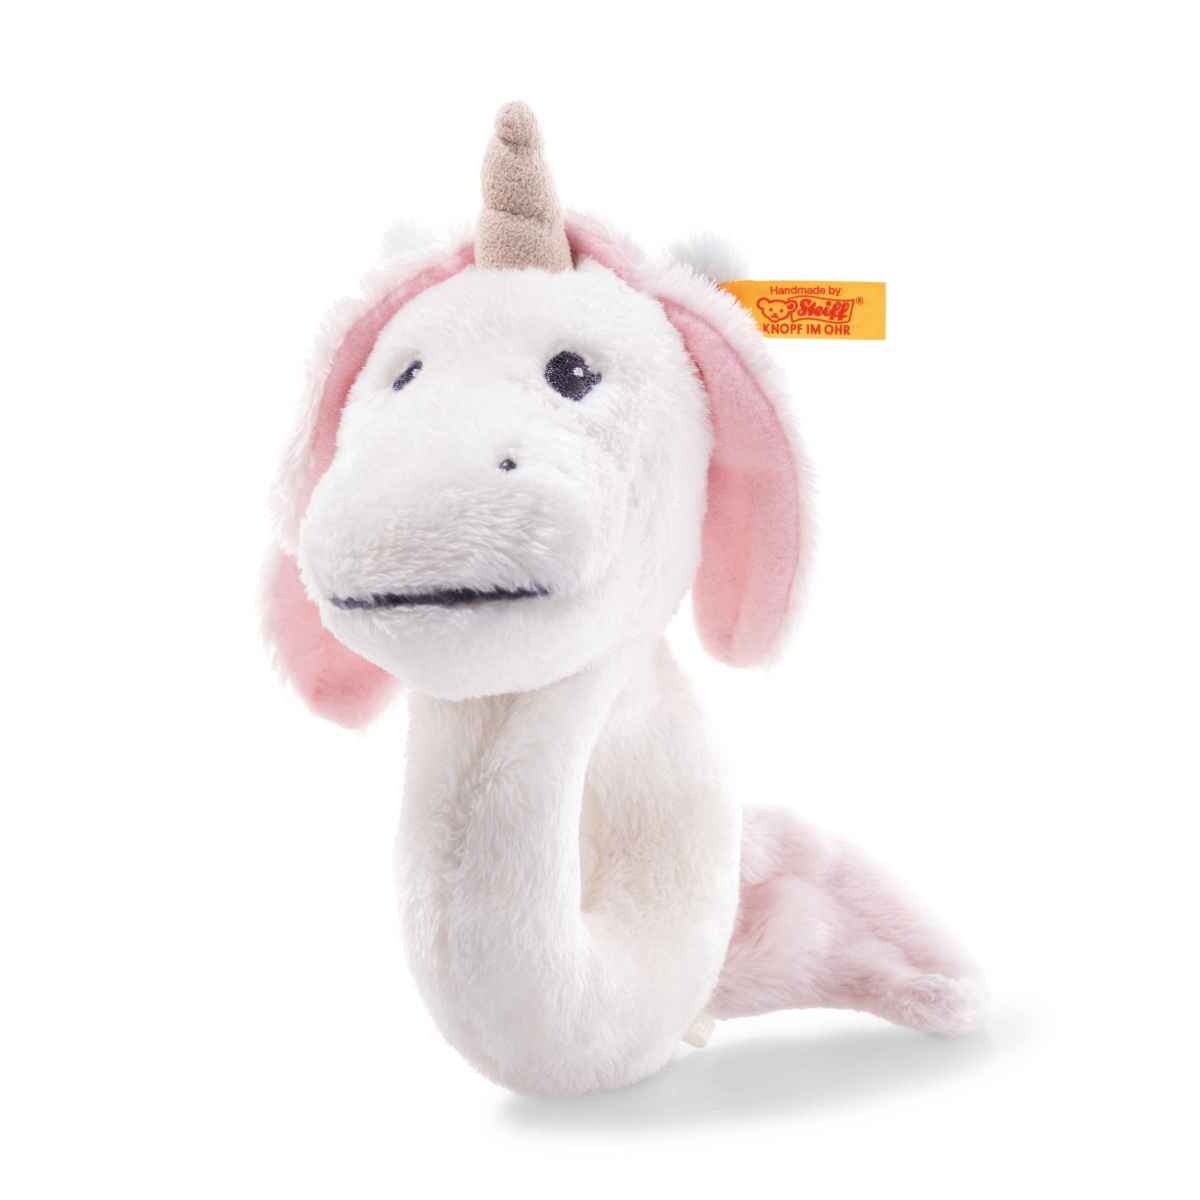 Погремушка Steiff Soft Cuddly Friends Unica Babe unicorn grip toy with rattle Штайф Малыш heavy gauge steel construction with cushion grip handle wall mounted can crusher 16oz with bottle opener durable can crusher